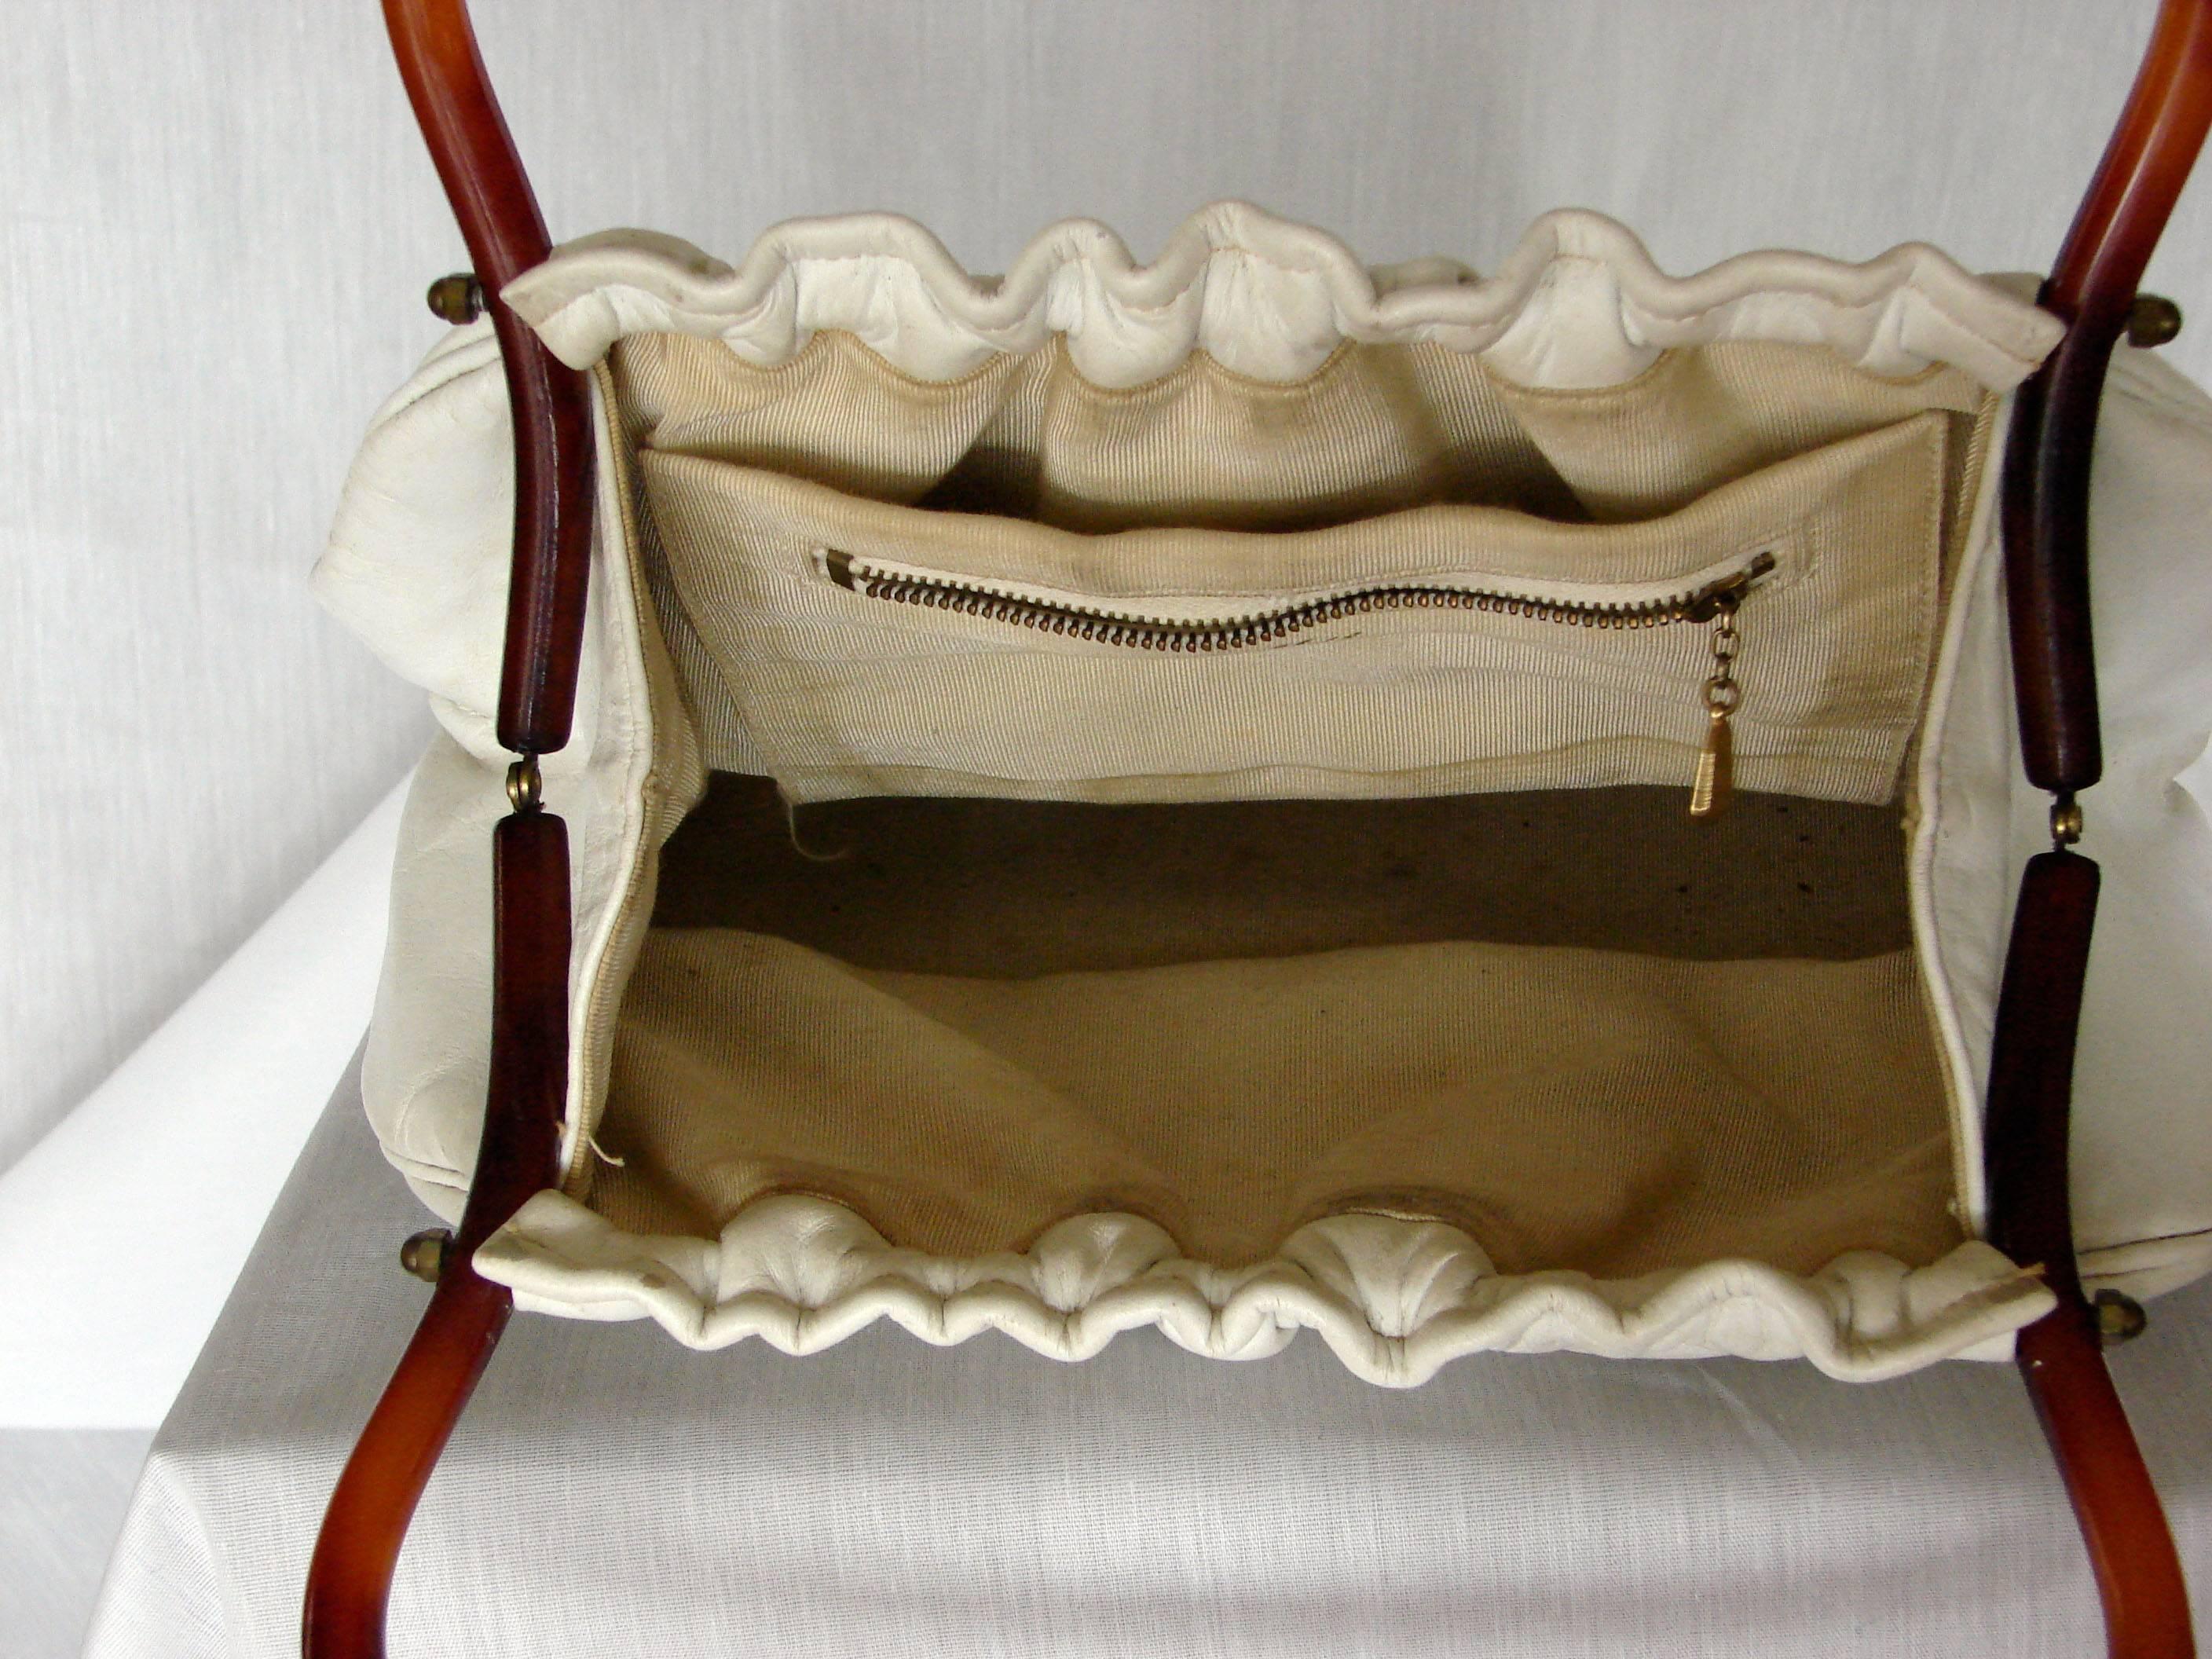 Women's Morris Moskowitz White Leather Handbag with Hinged Lucite Handles 1960s 